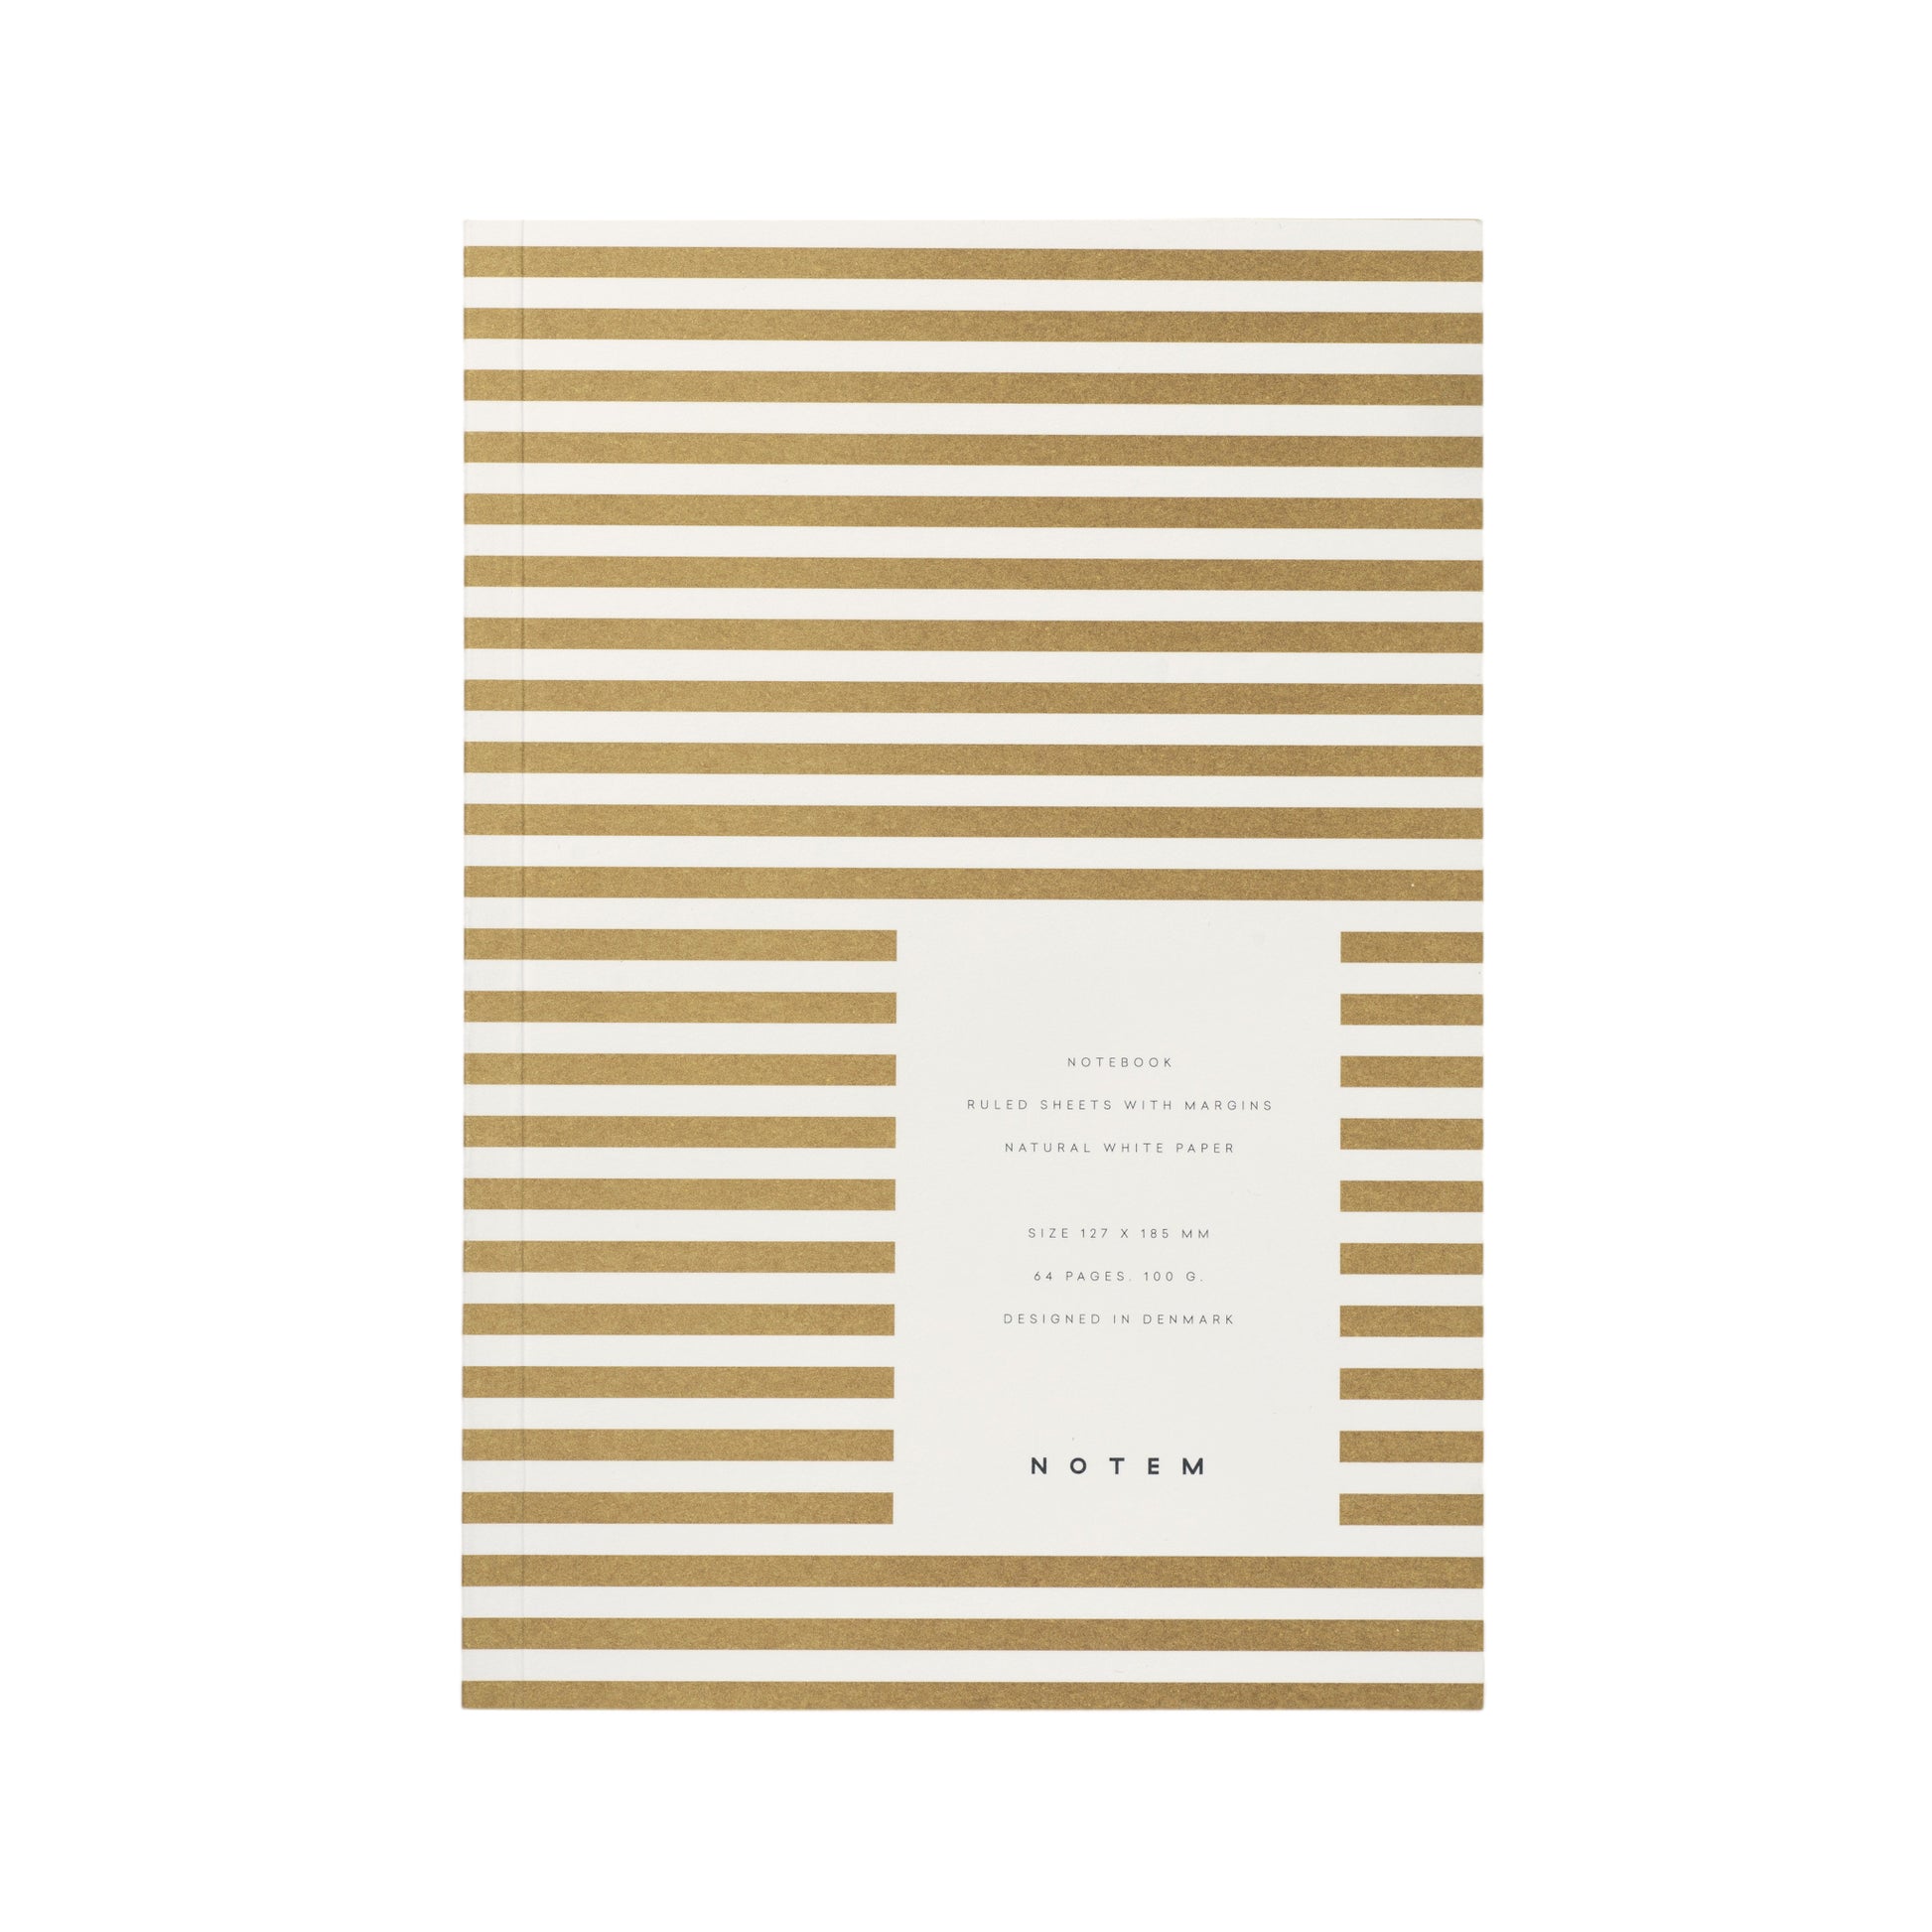 Pocket size notebook with a narrow mustard and white stripe softcover.